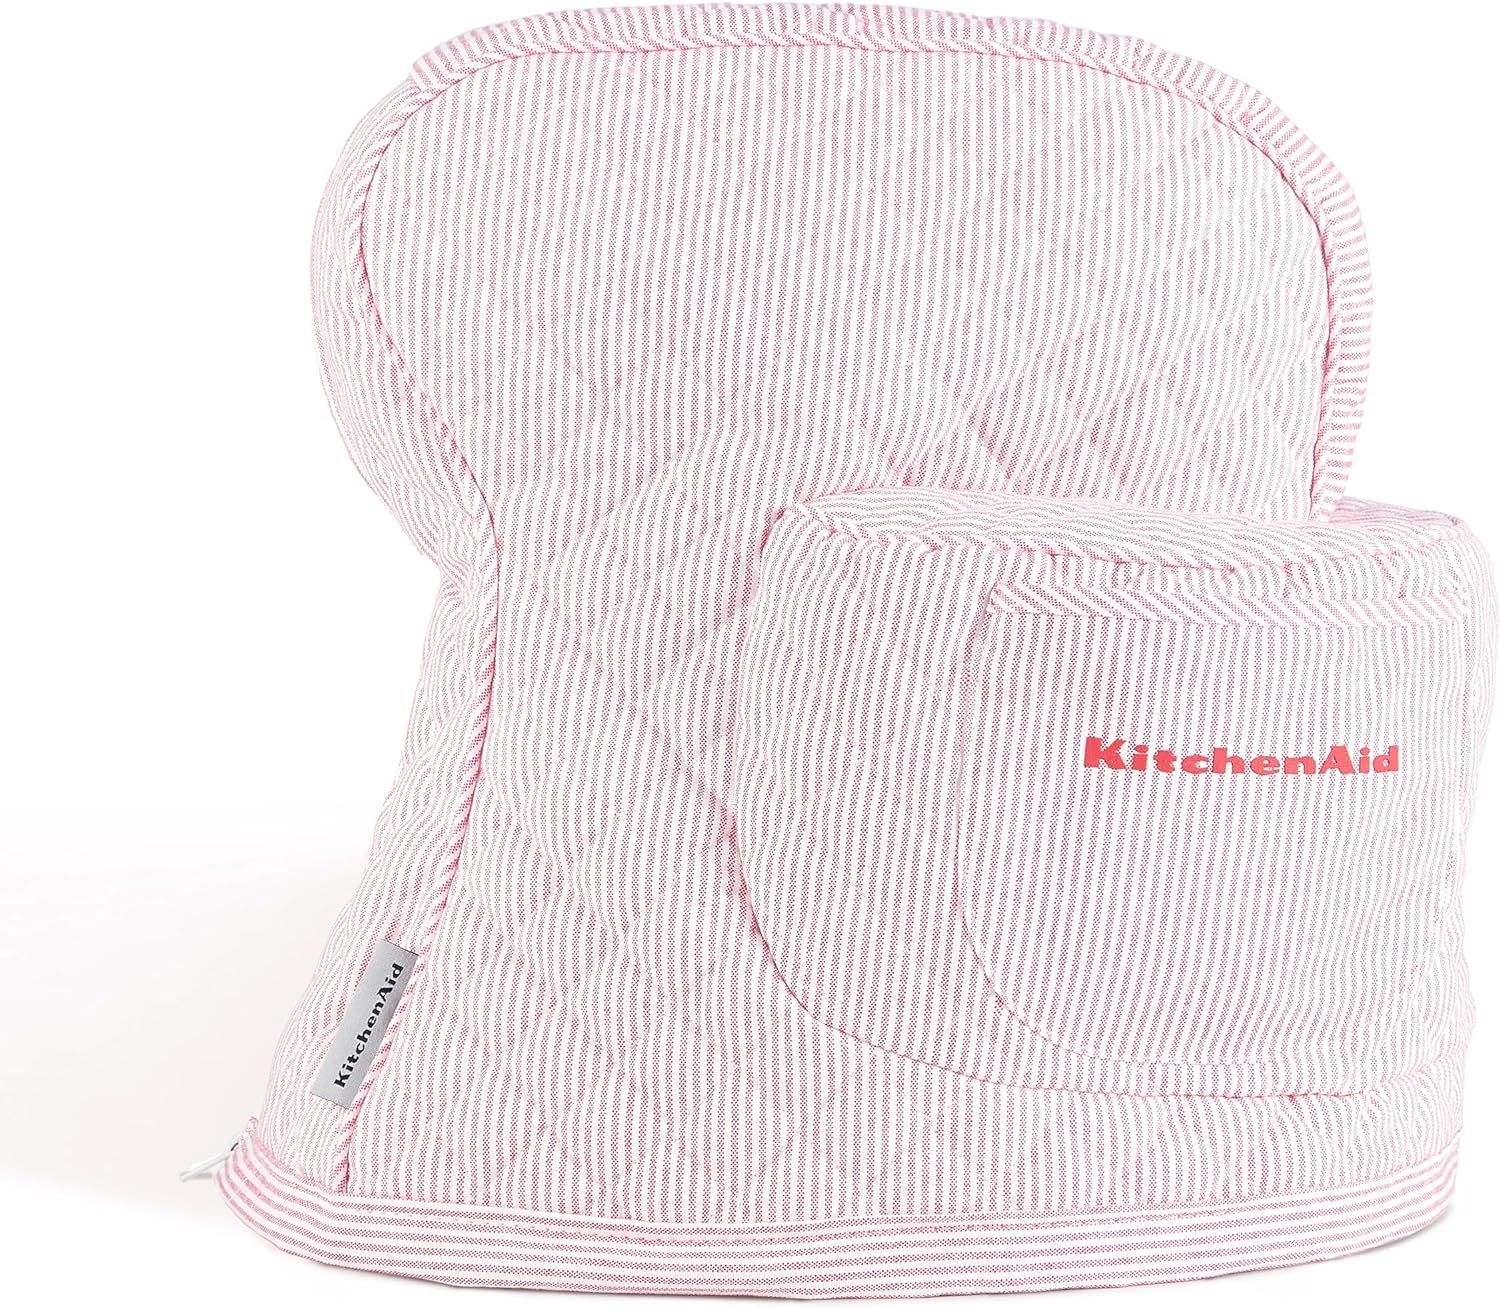 Kitchenaid adjustable tick band stand mixer cover with storage bag, quilted, 100% cotton, hibiscus pink, 14.4 \ "x 18 \" x 10 \ "